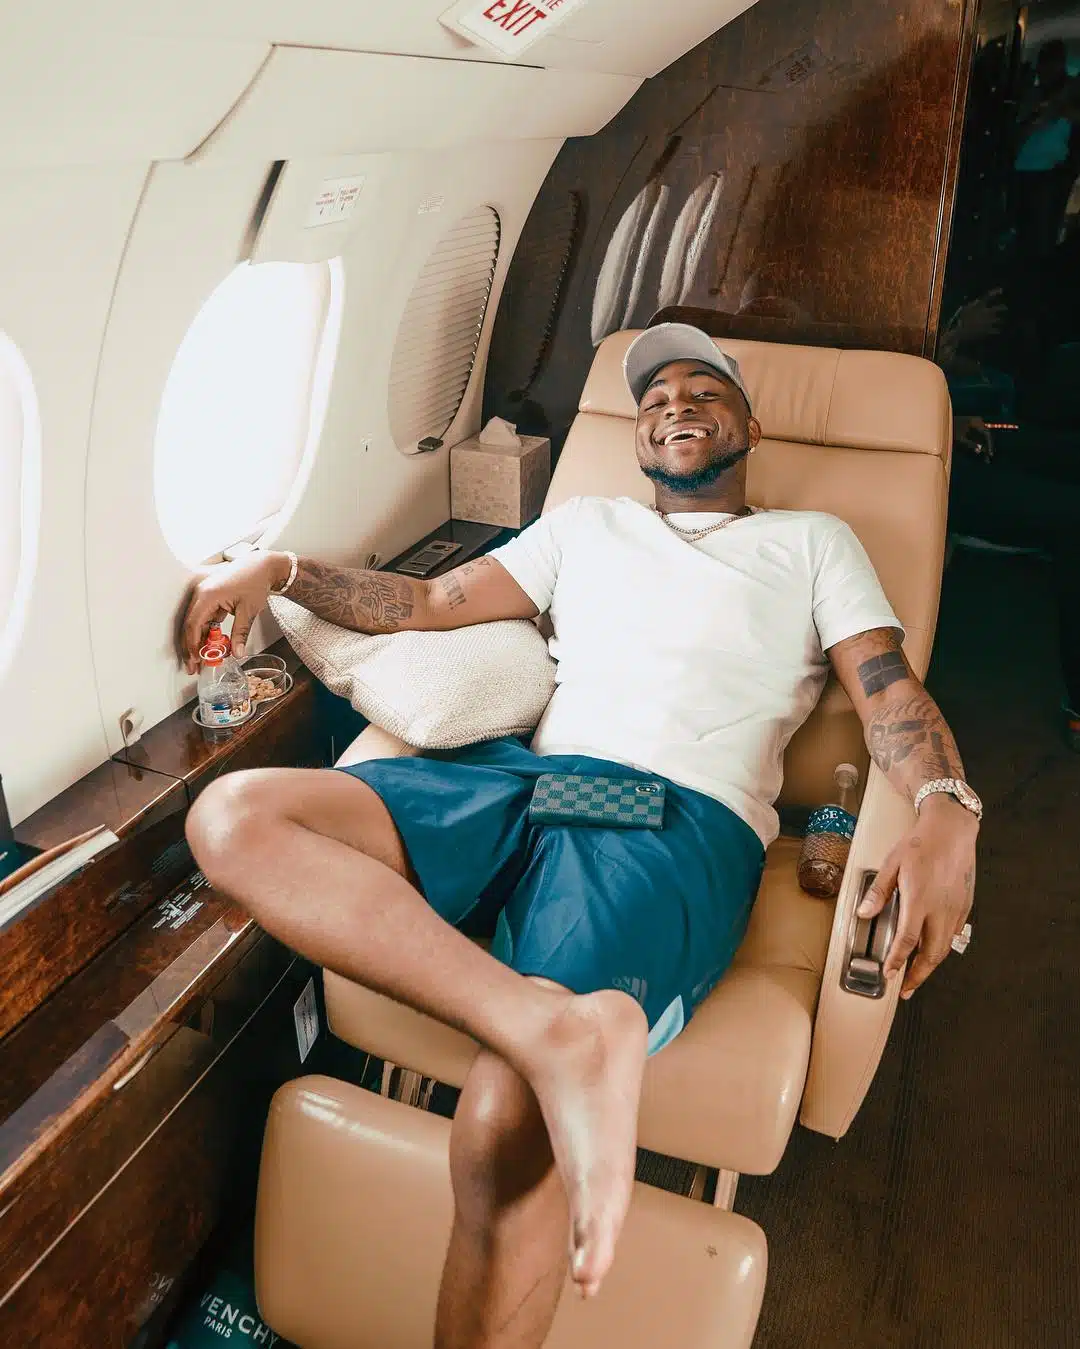 “Even if Davido stops making music today, he’ll still be flying private jet; he has the money” – Don Jazzy